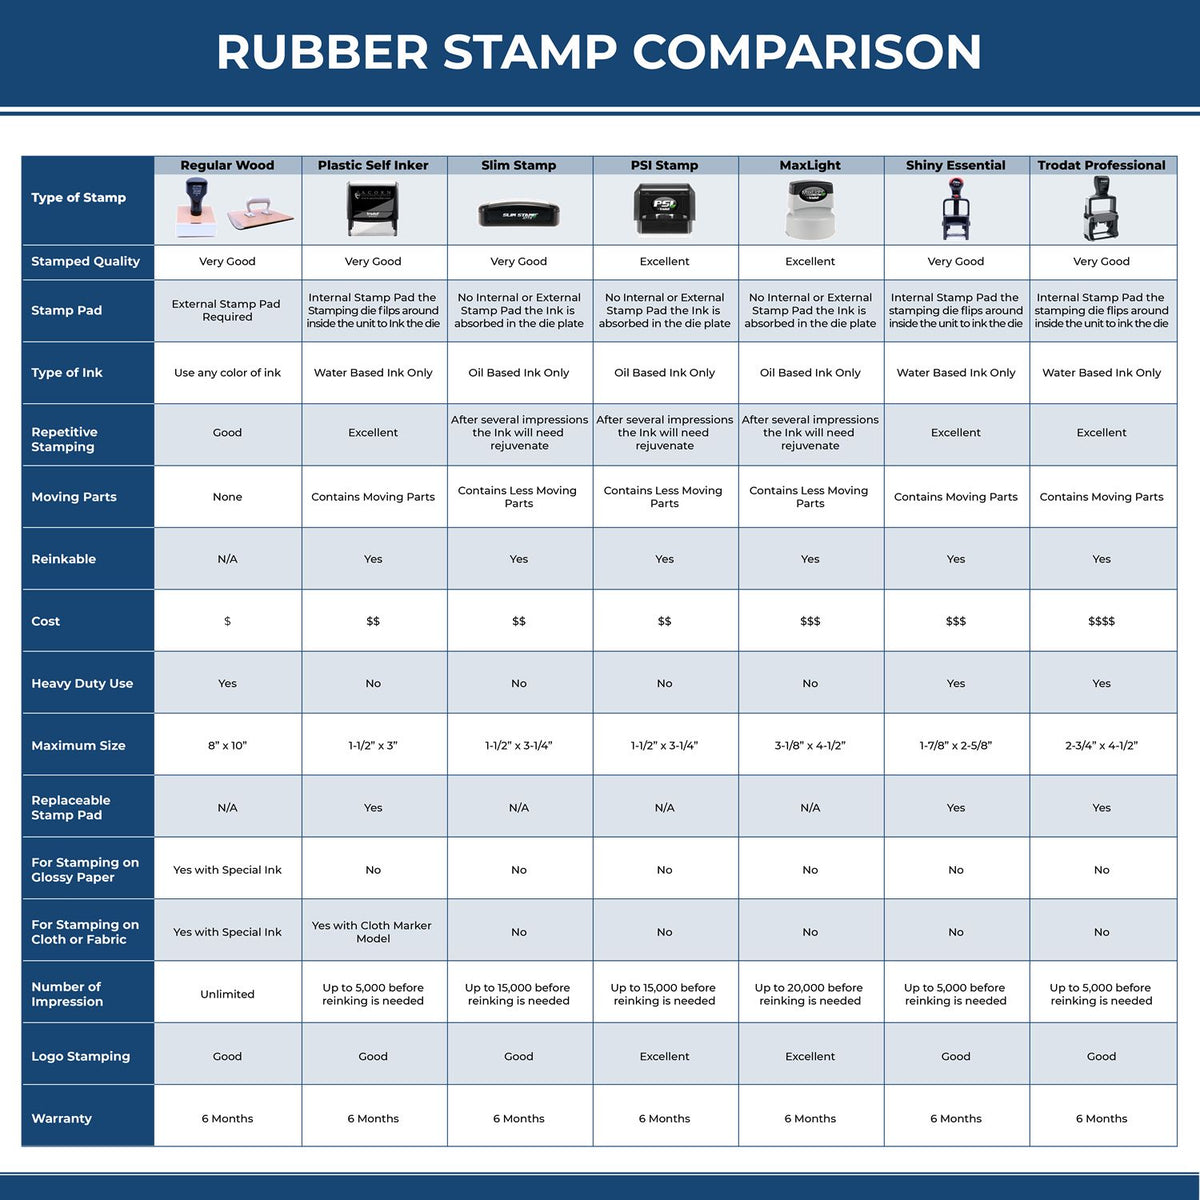 A comparison chart for the different types of mount models available for the Premium MaxLight Pre-Inked Nebraska Landscape Architectural Stamp.